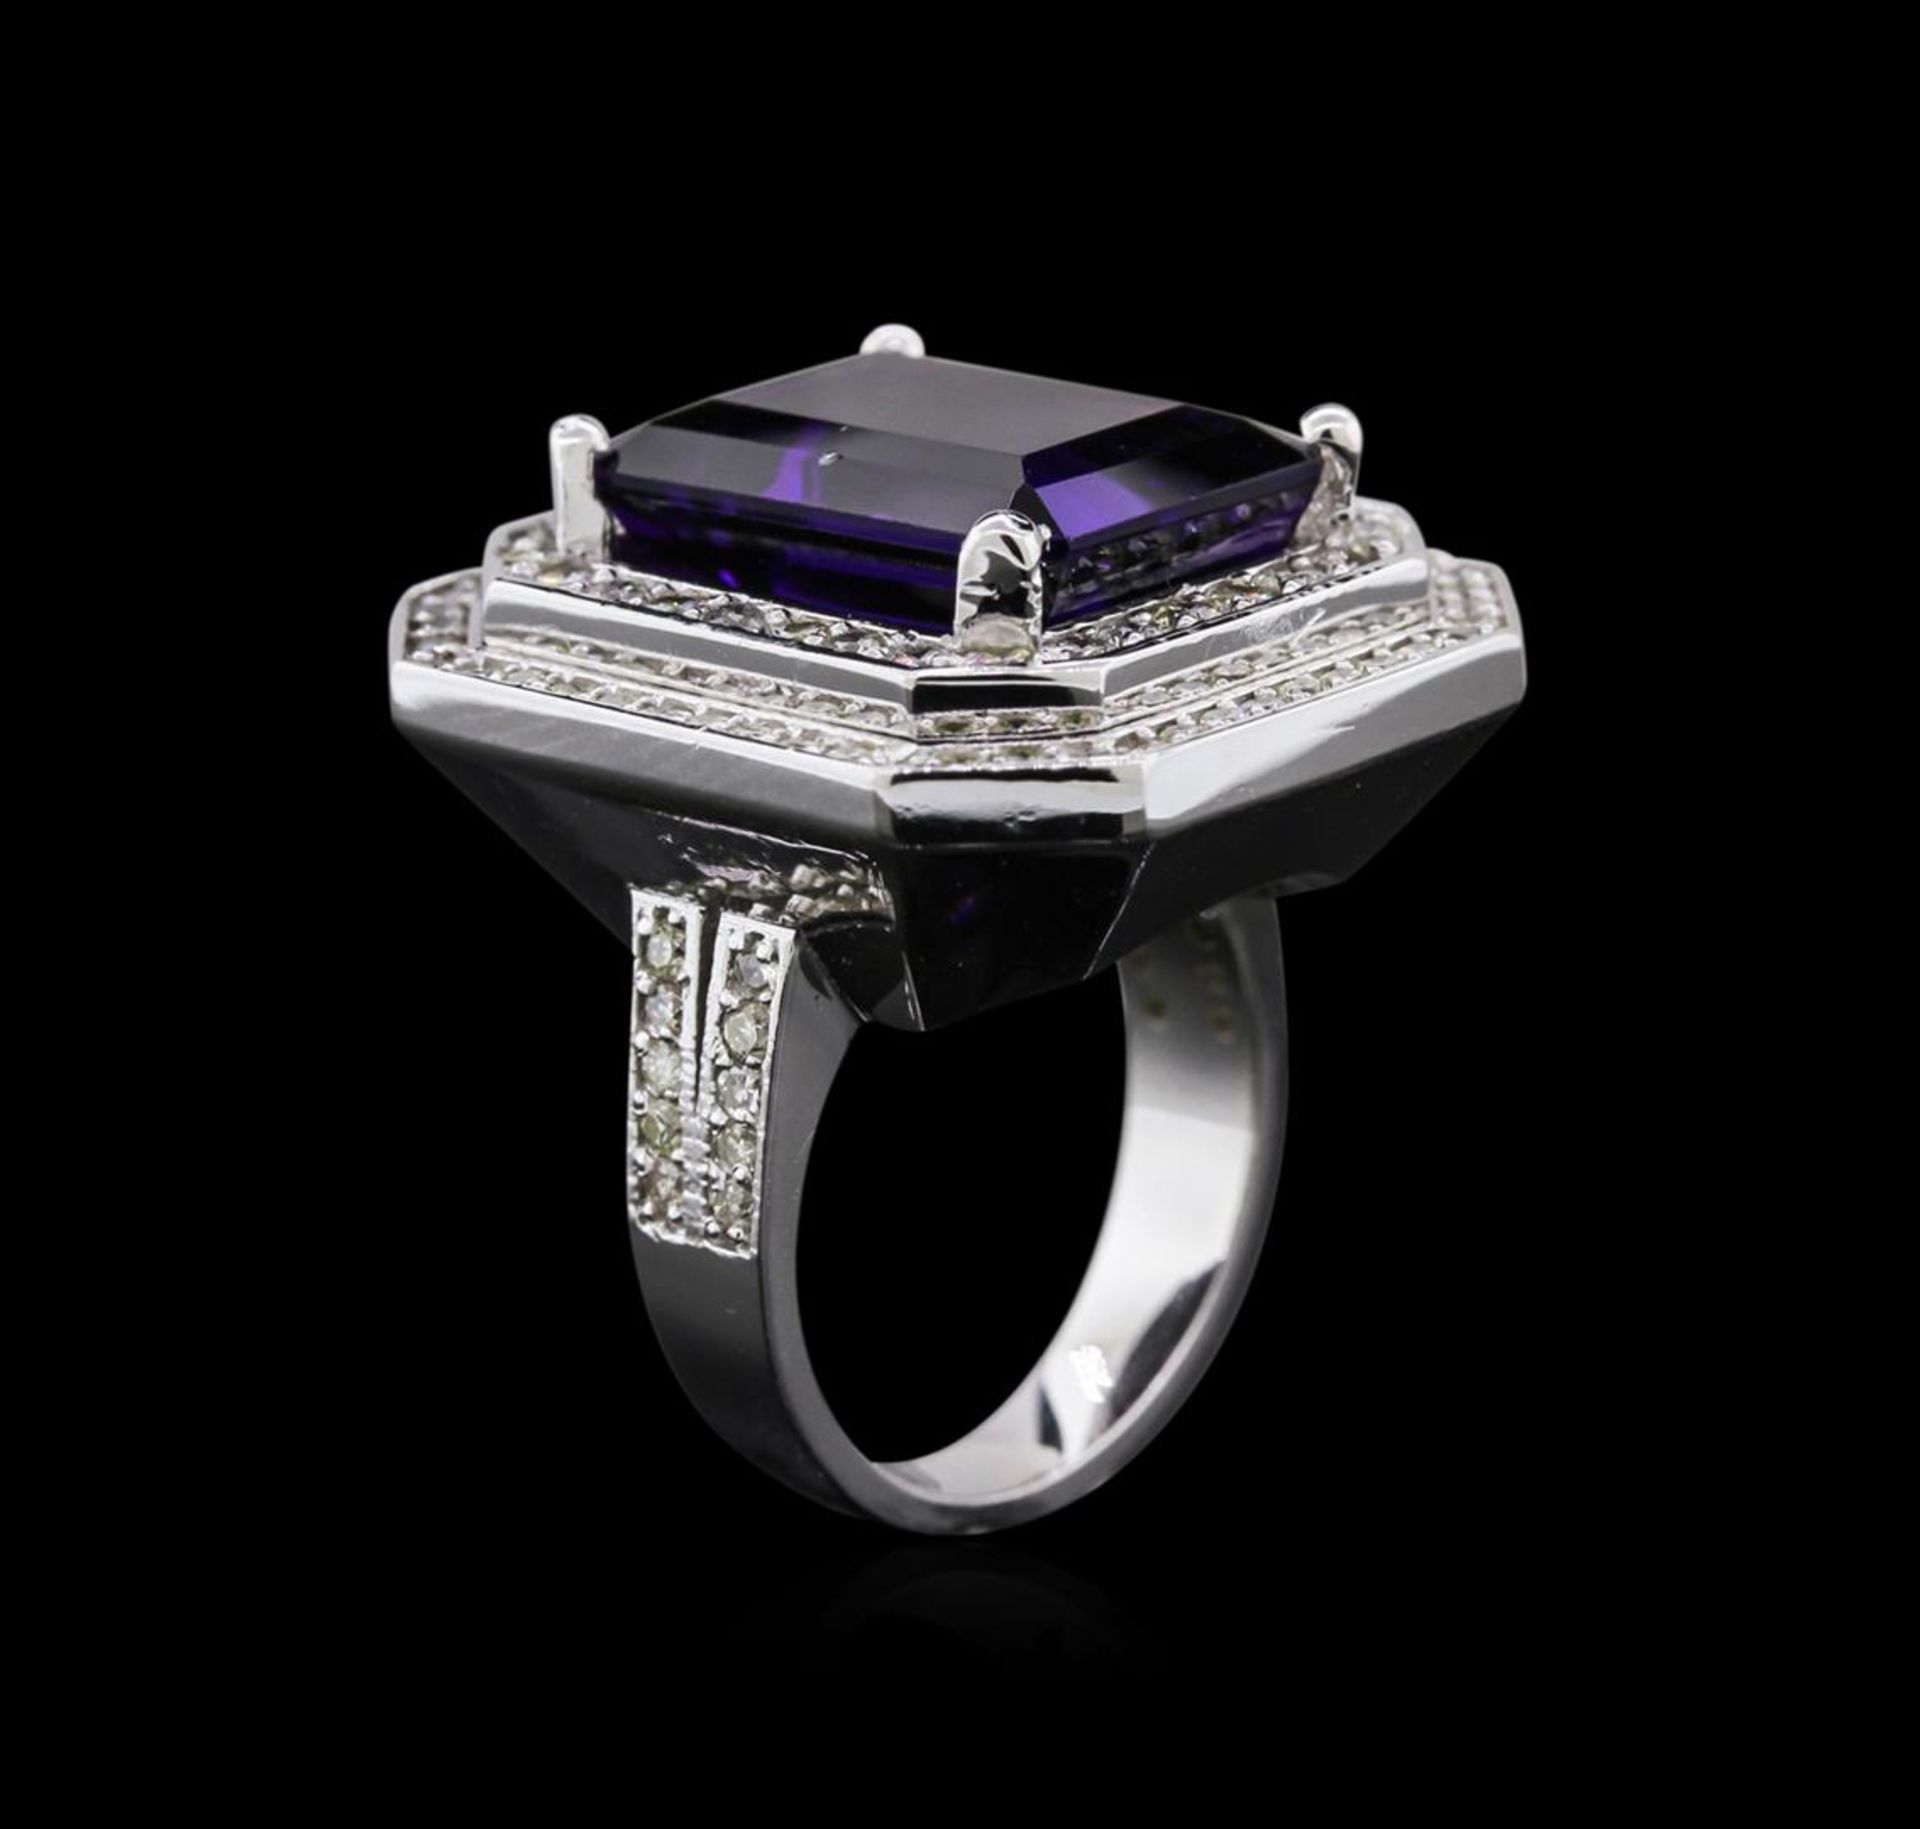 14KT White Gold 11.14 ctw Amethyst and Diamond Ring - Image 3 of 4